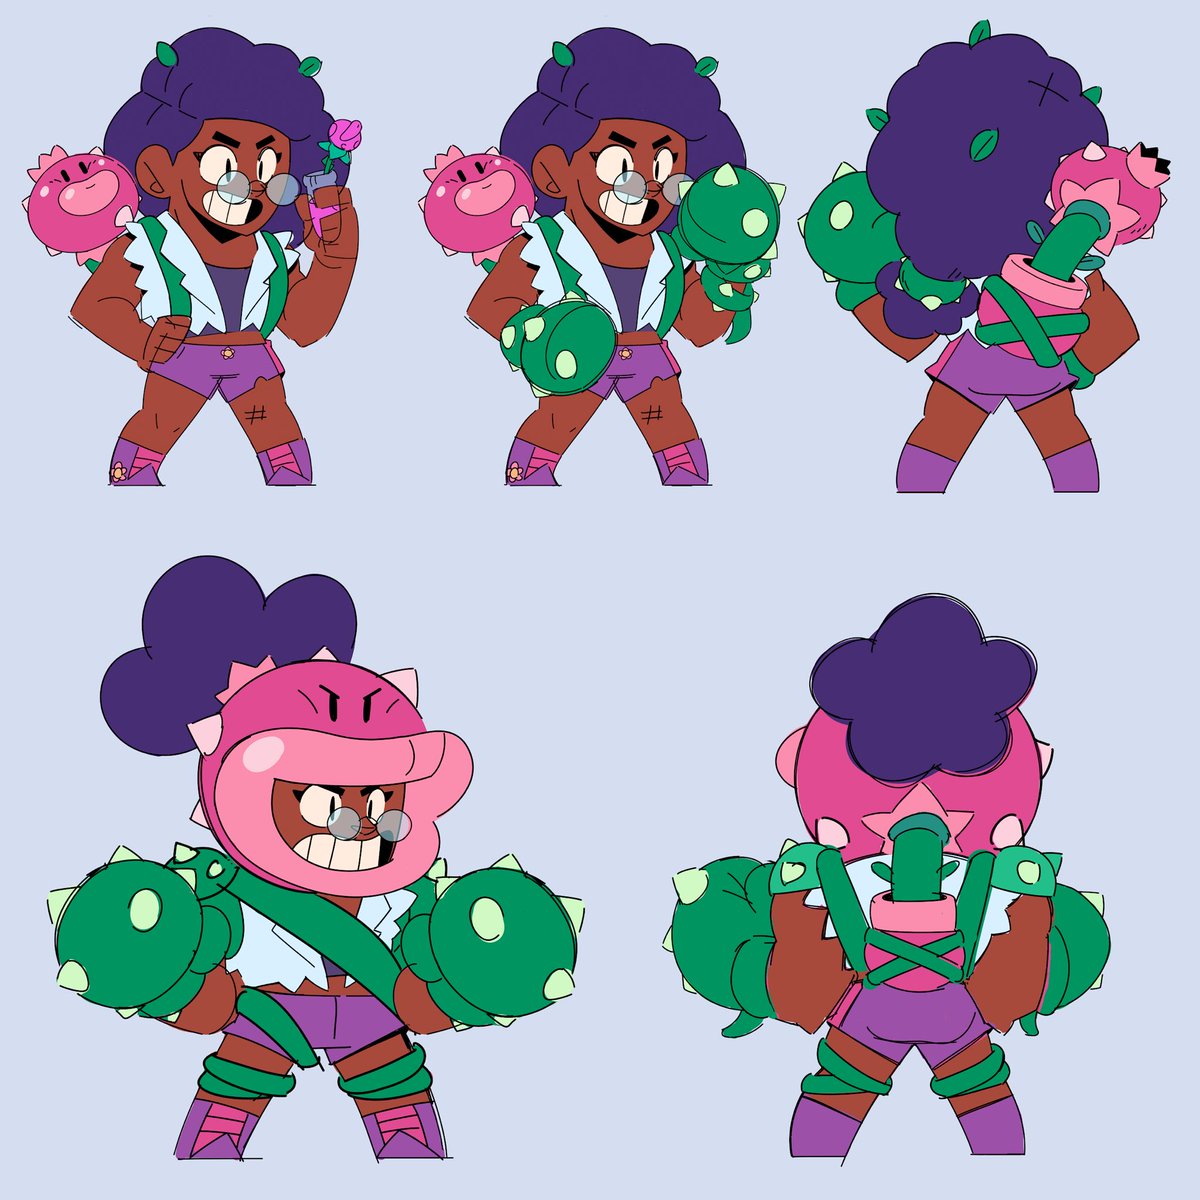 Frank Fs7n On Twitter Here S Pawchaw S Concept For Rosa The Next Brawler In Brawlstars This Is One Of My Favorite Designs So Far Love The Transformation For The Super - brawlers brawl stars rosa